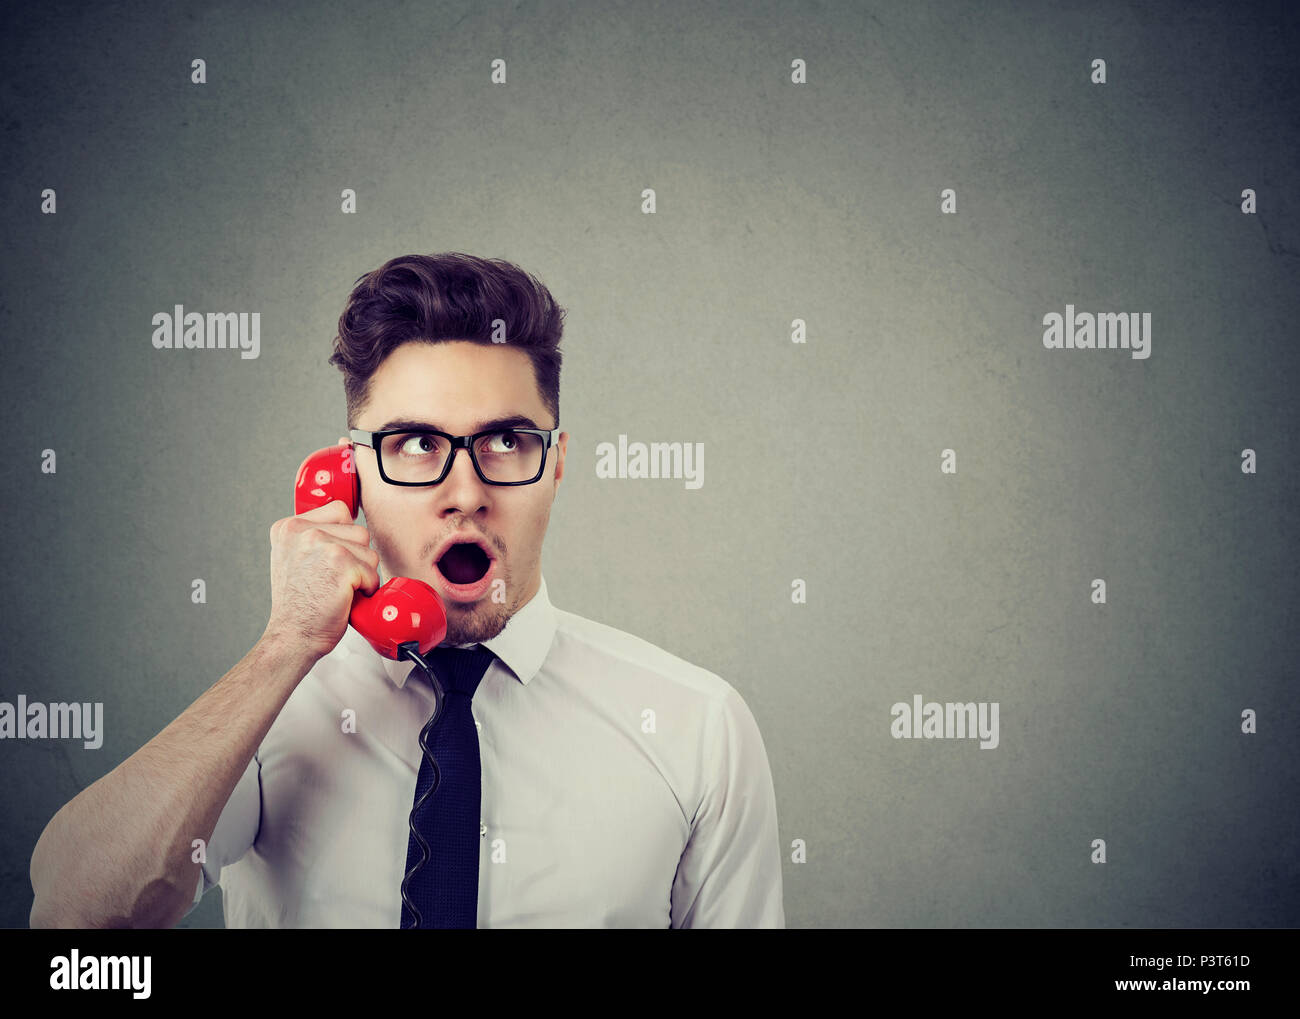 Amazed shocked young business man talking on a red telephone Stock Photo